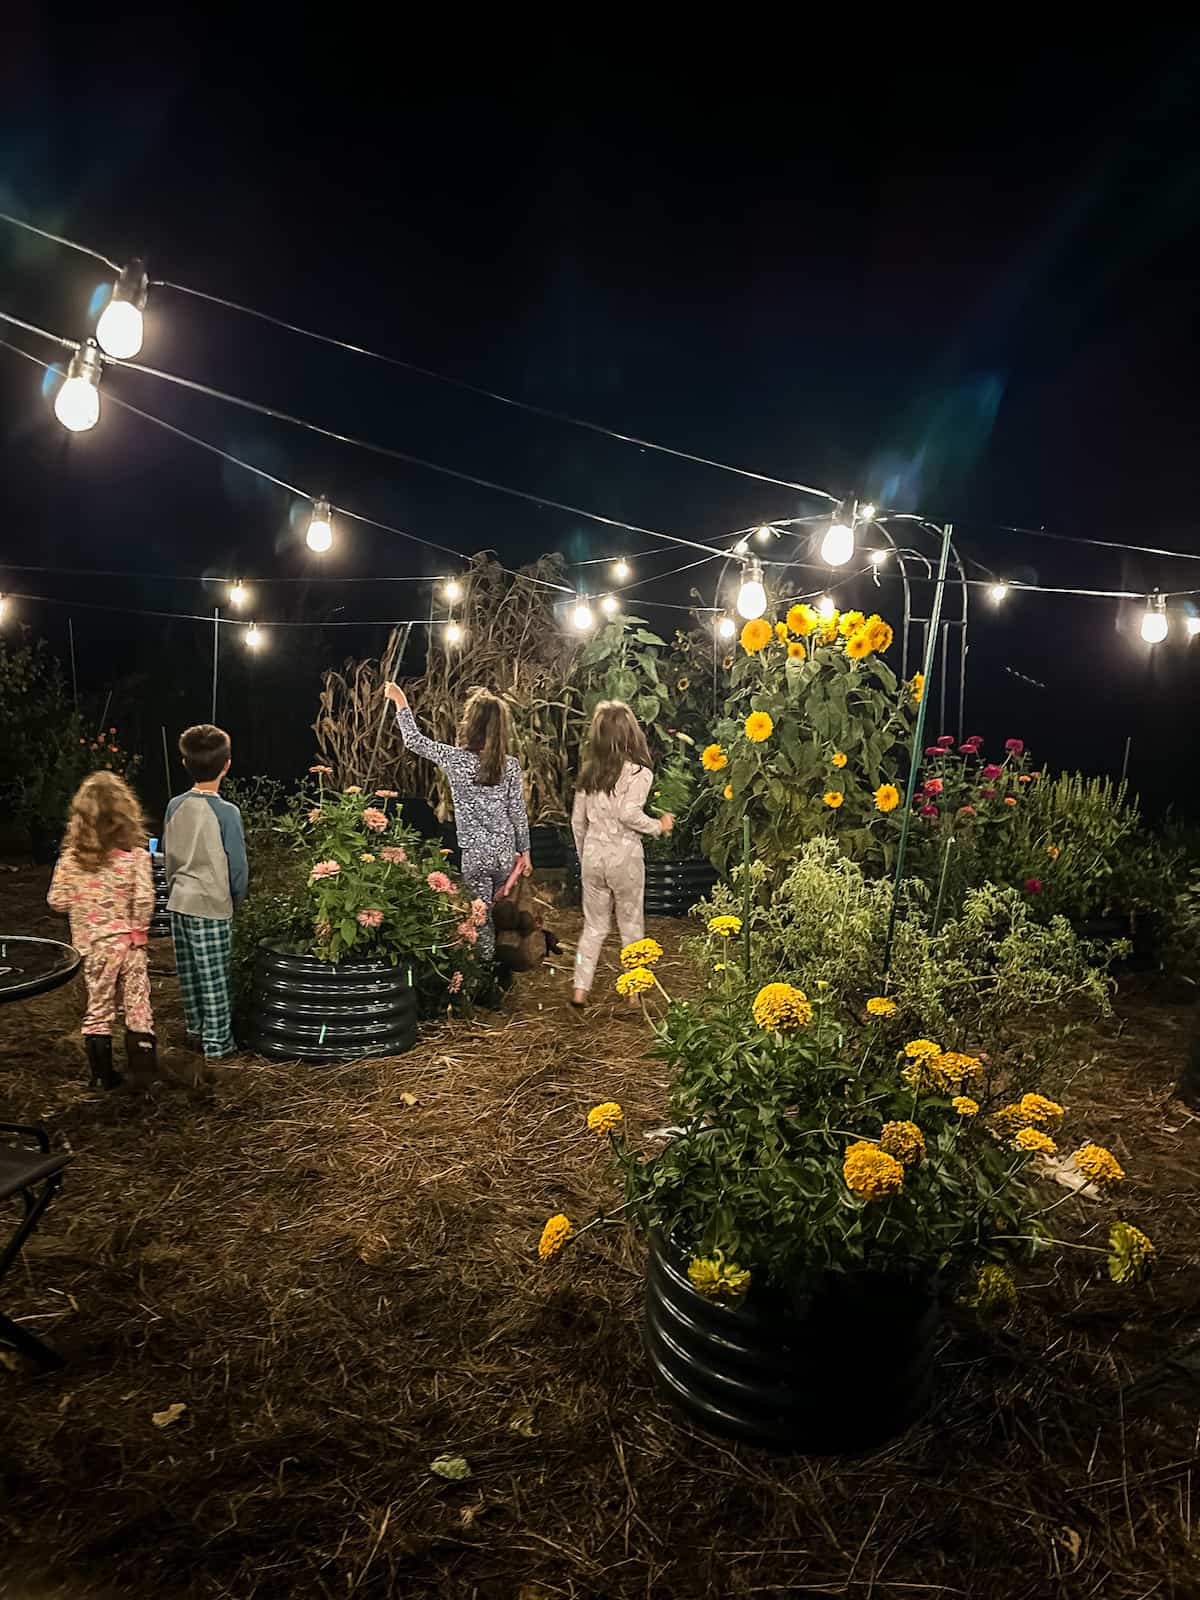 children in the garden at night with string lights.